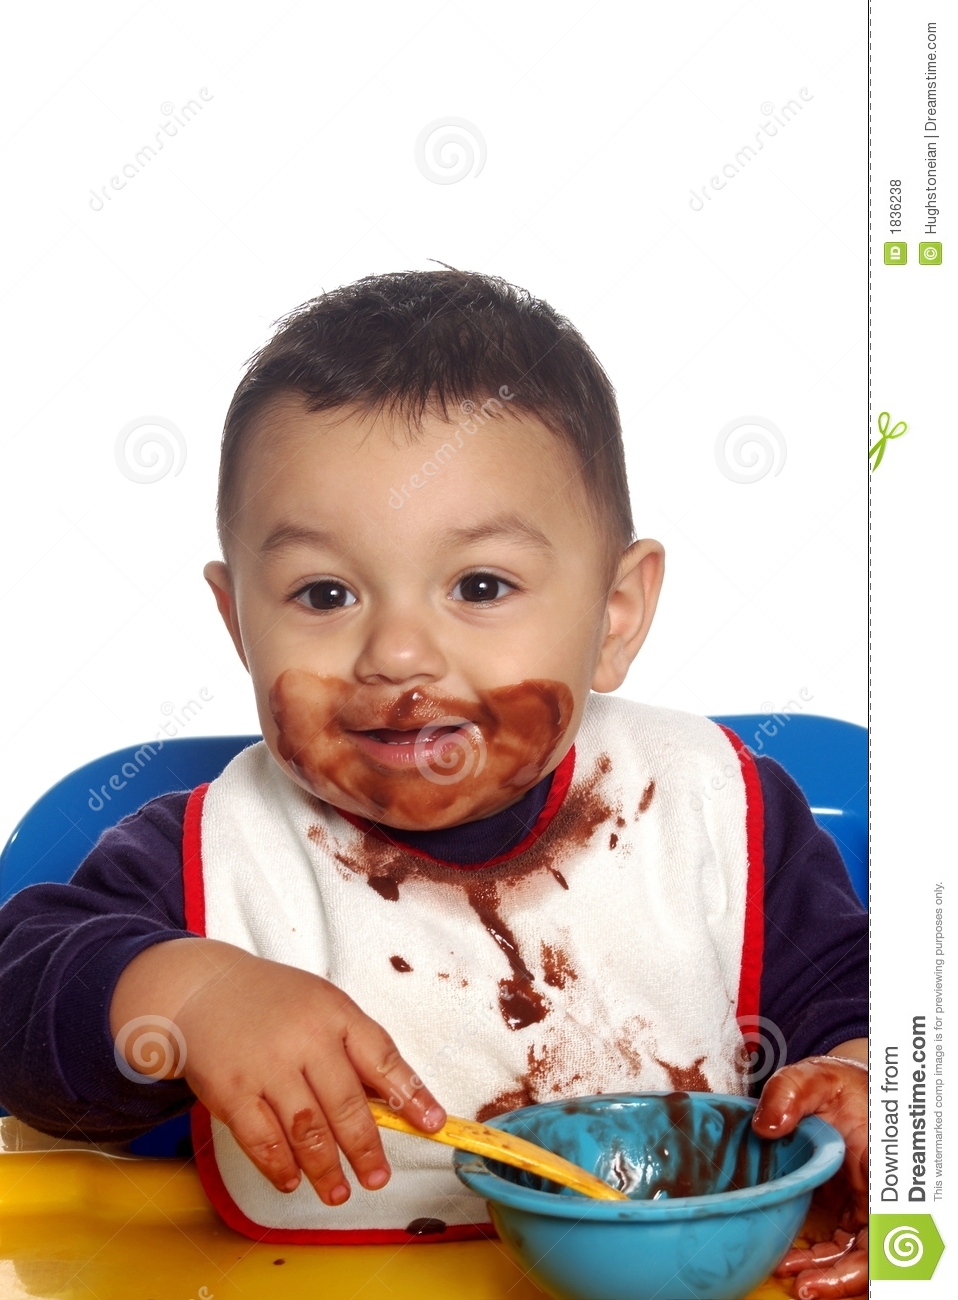 Messy Face Baby 15 Months Royalty Free Stock Photos   Image  1836238